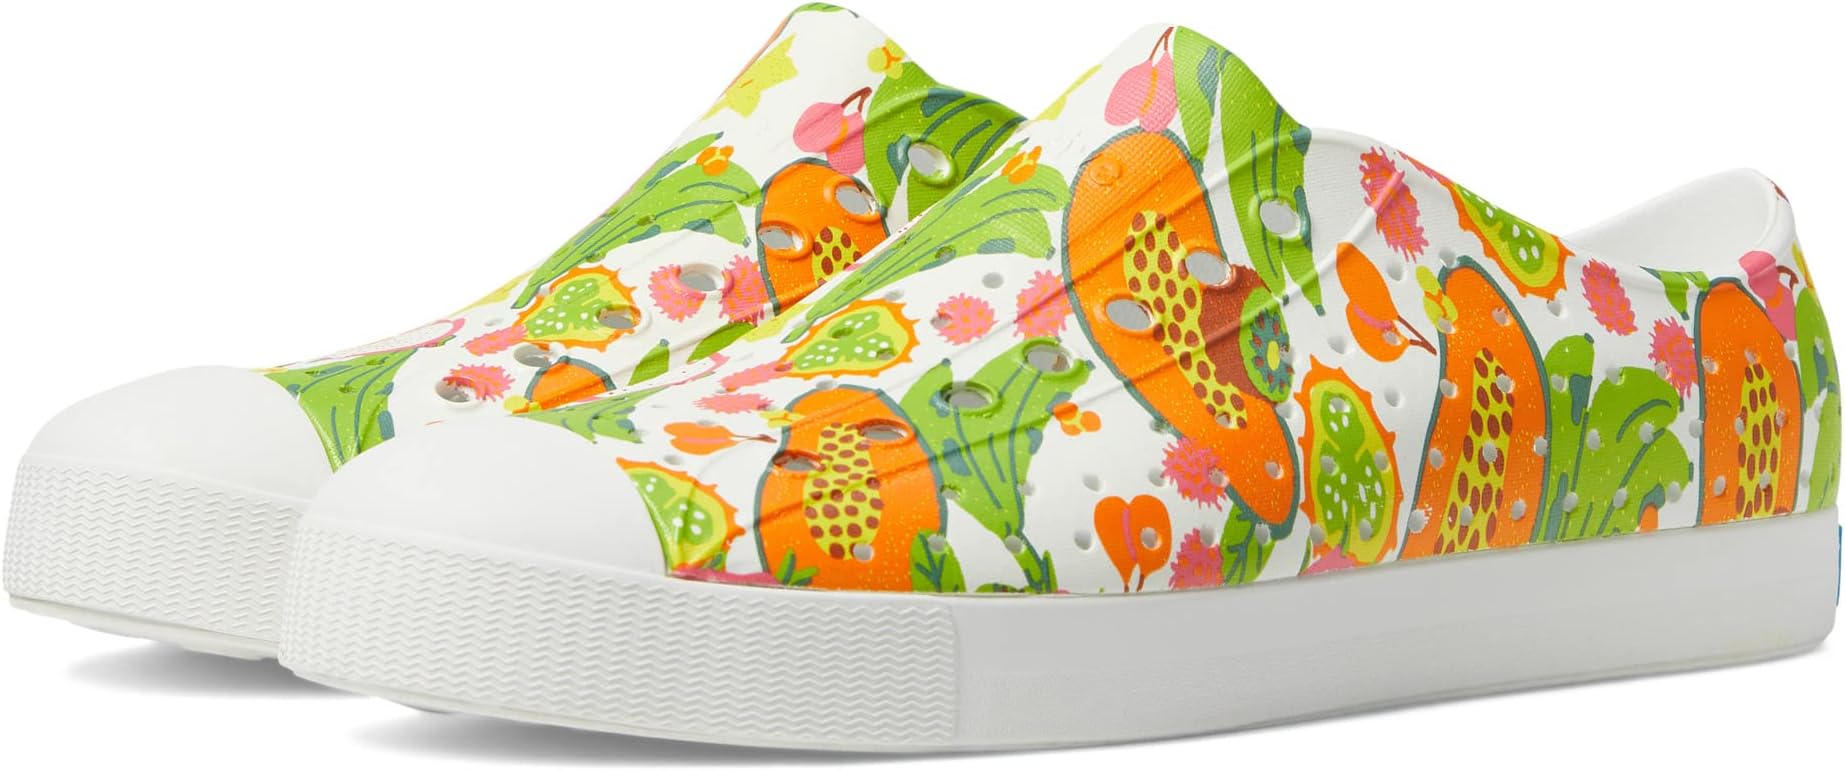 Кроссовки Jefferson Sugarlite Print Native Shoes, цвет Shell White/Shell White/Dazzle Tropic Fruits eelhoe dazzle white toothpaste removes yellow tooth scale halitosis tooth stains brightens dazzle ，white freshens breath